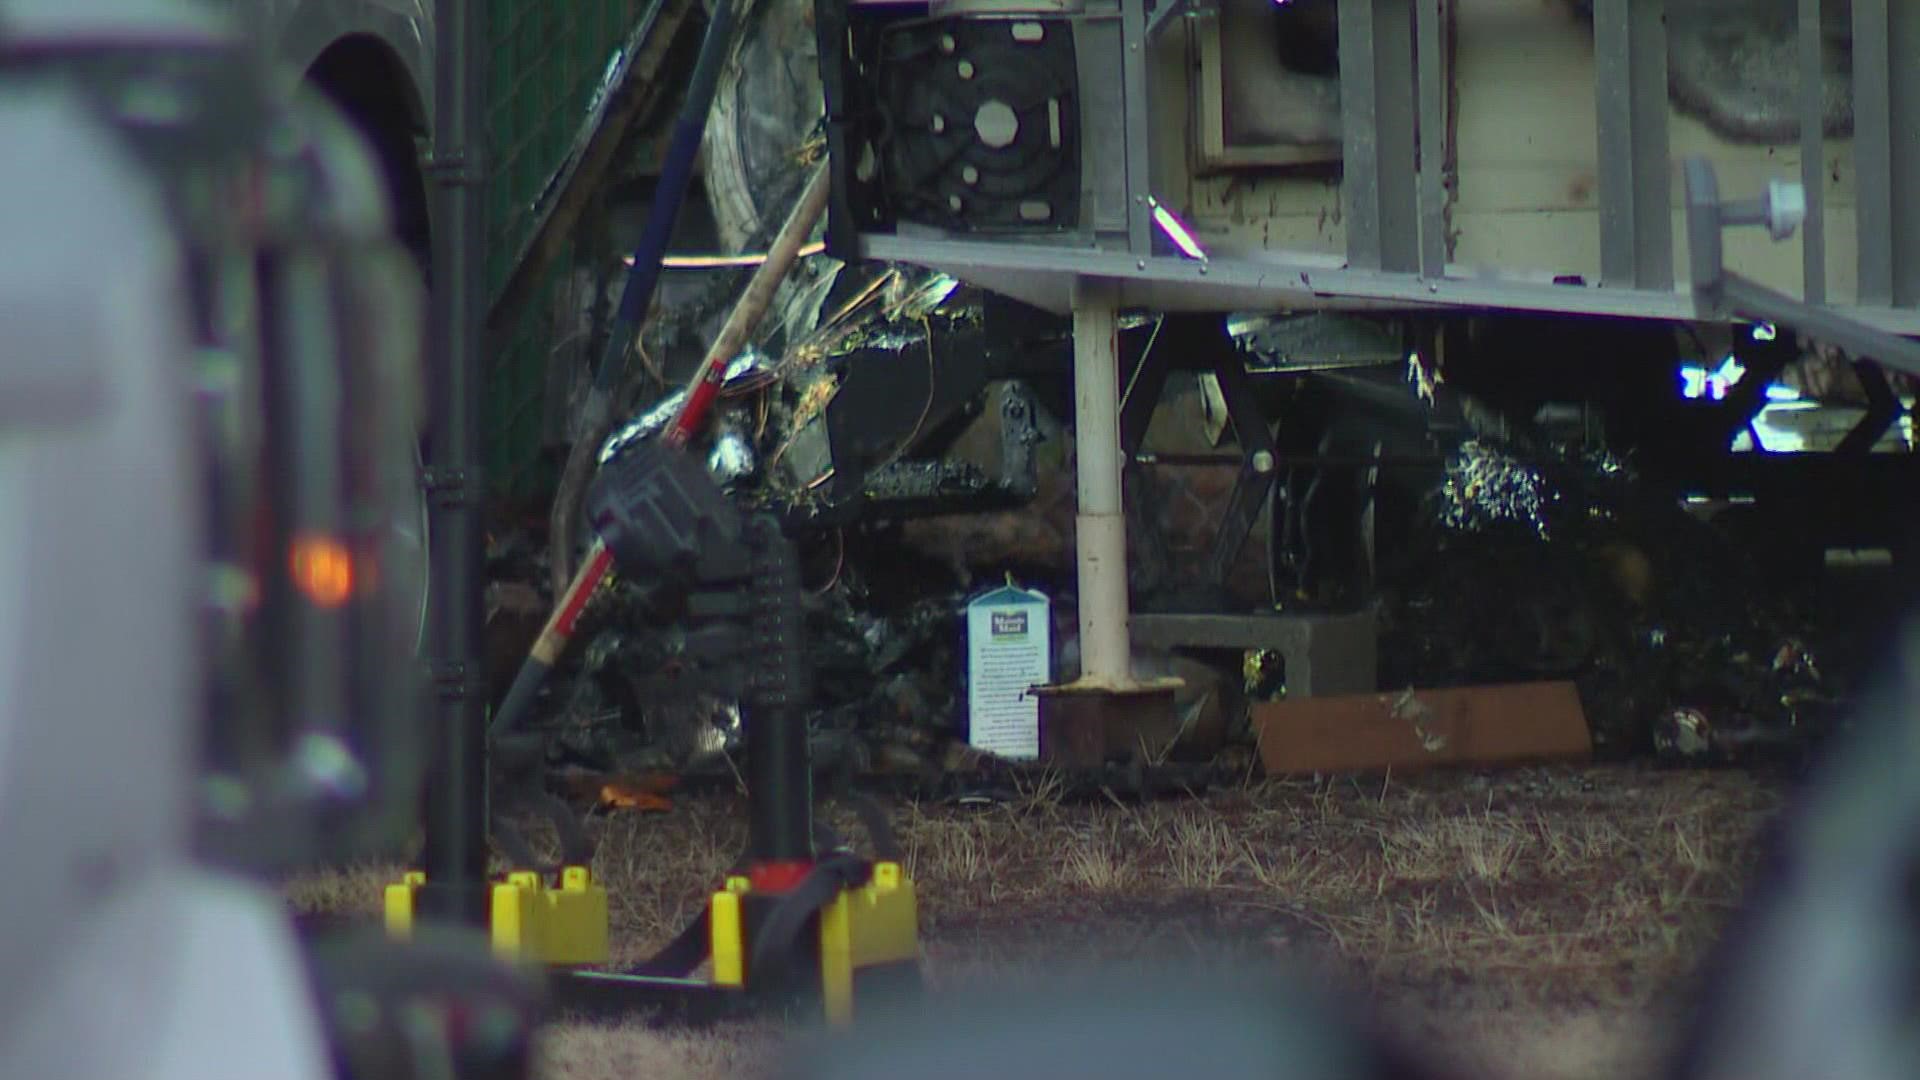 Arlington police are investigating what caused a deadly fire at the Smokey Point RV Park in Snohomish County early Wednesday morning.